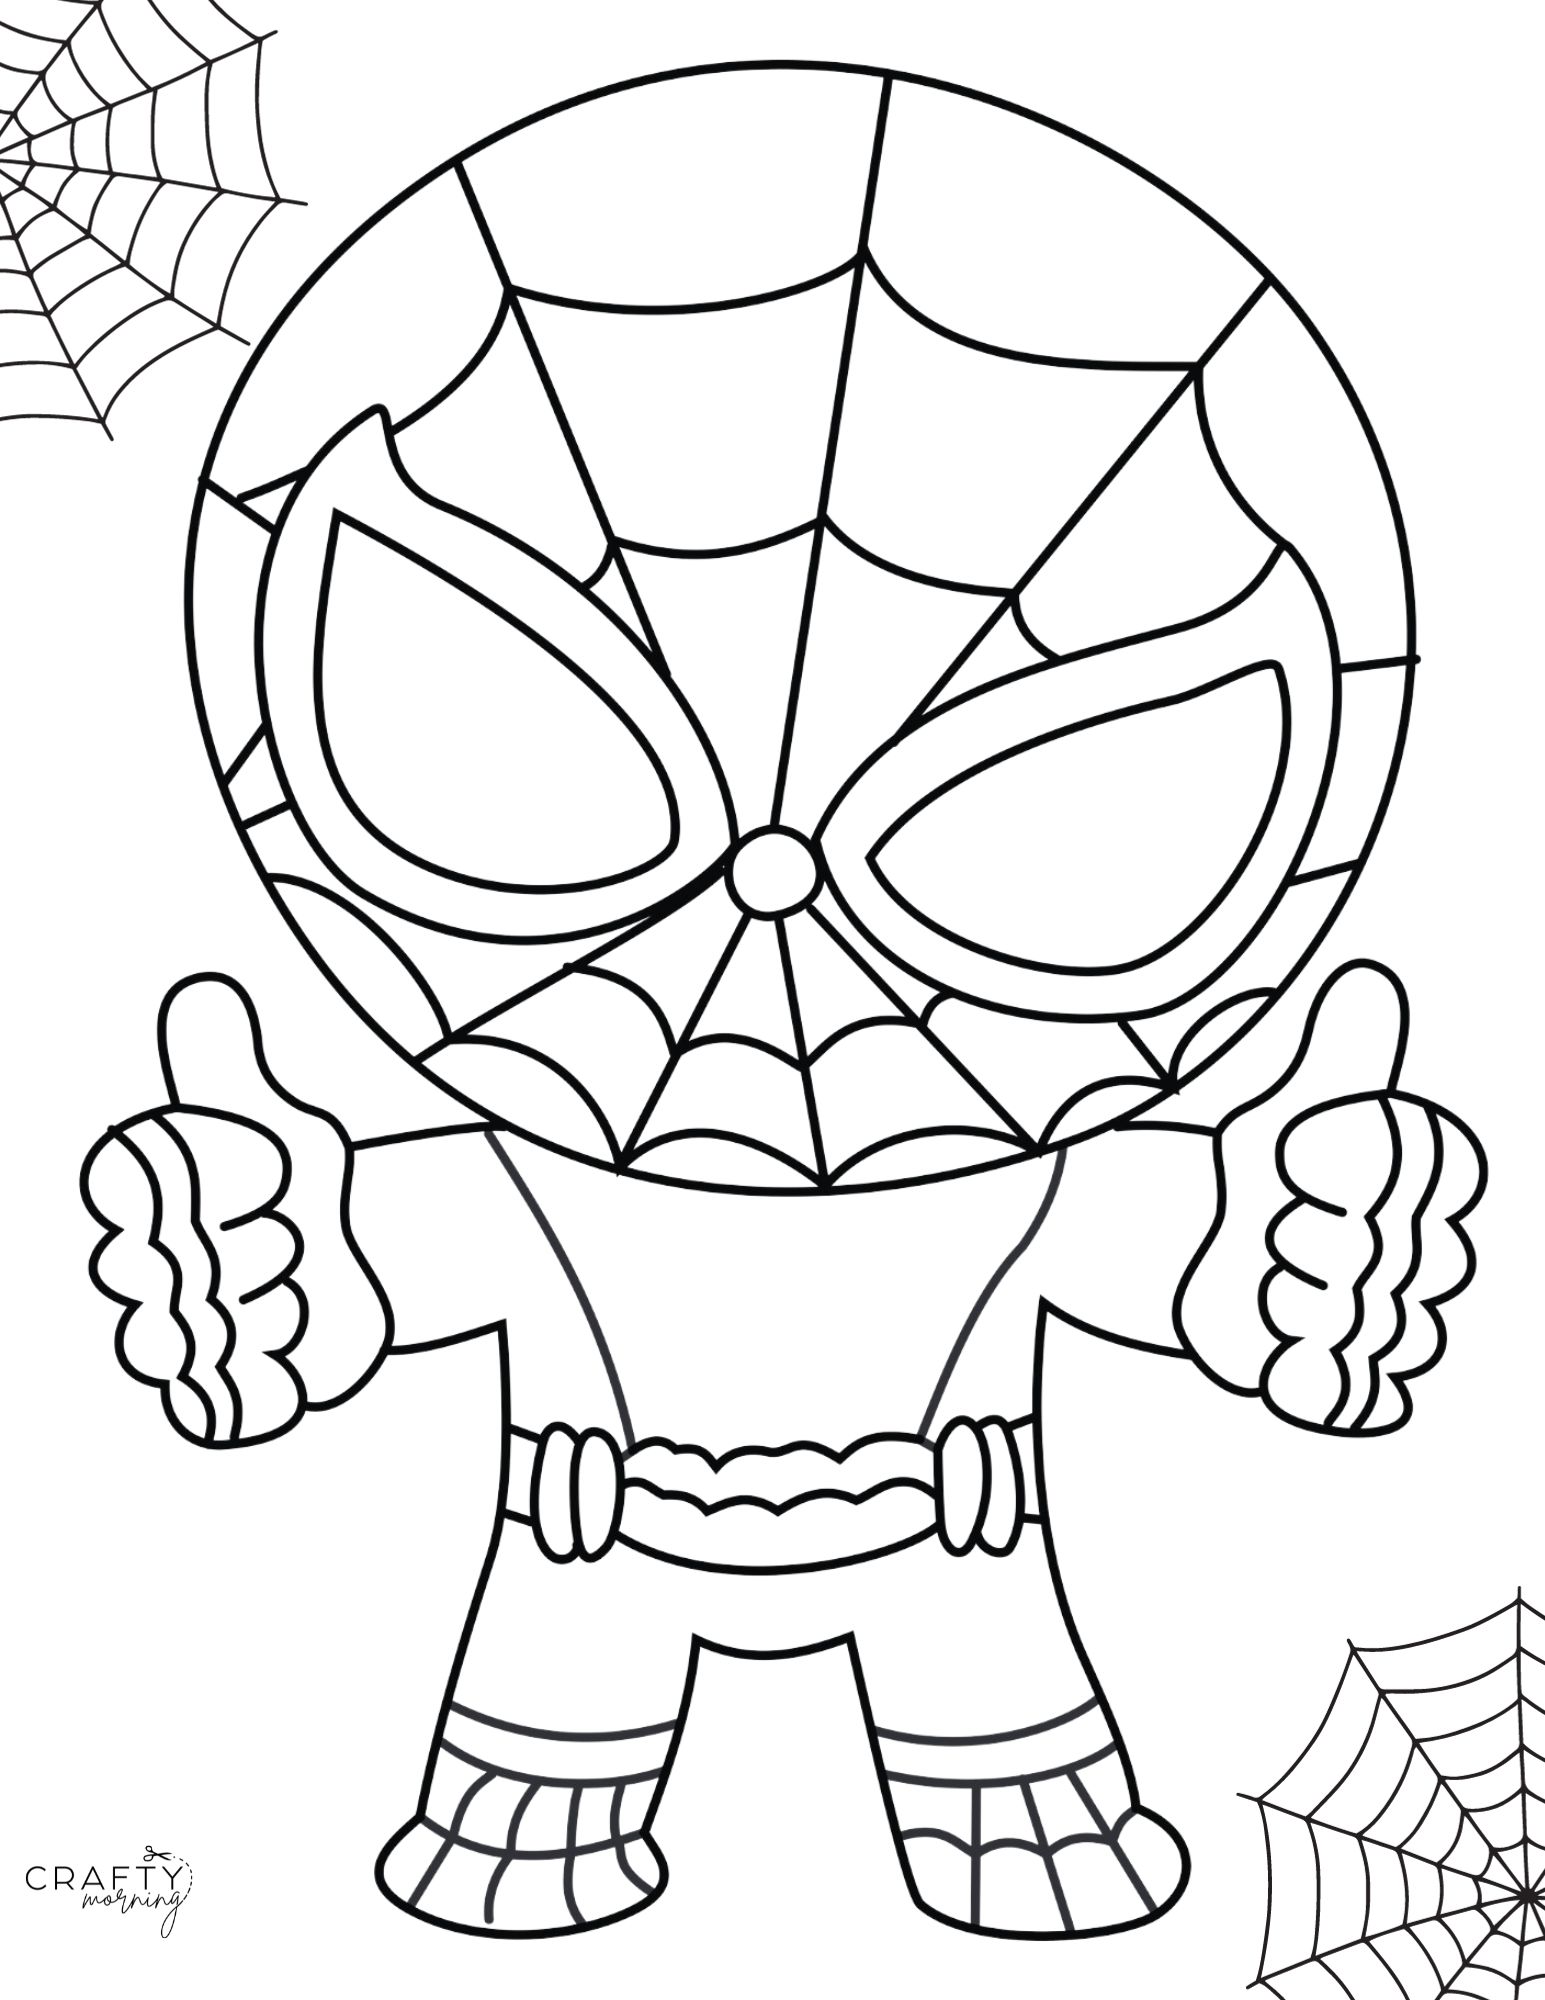 How to draw spiderman for kids